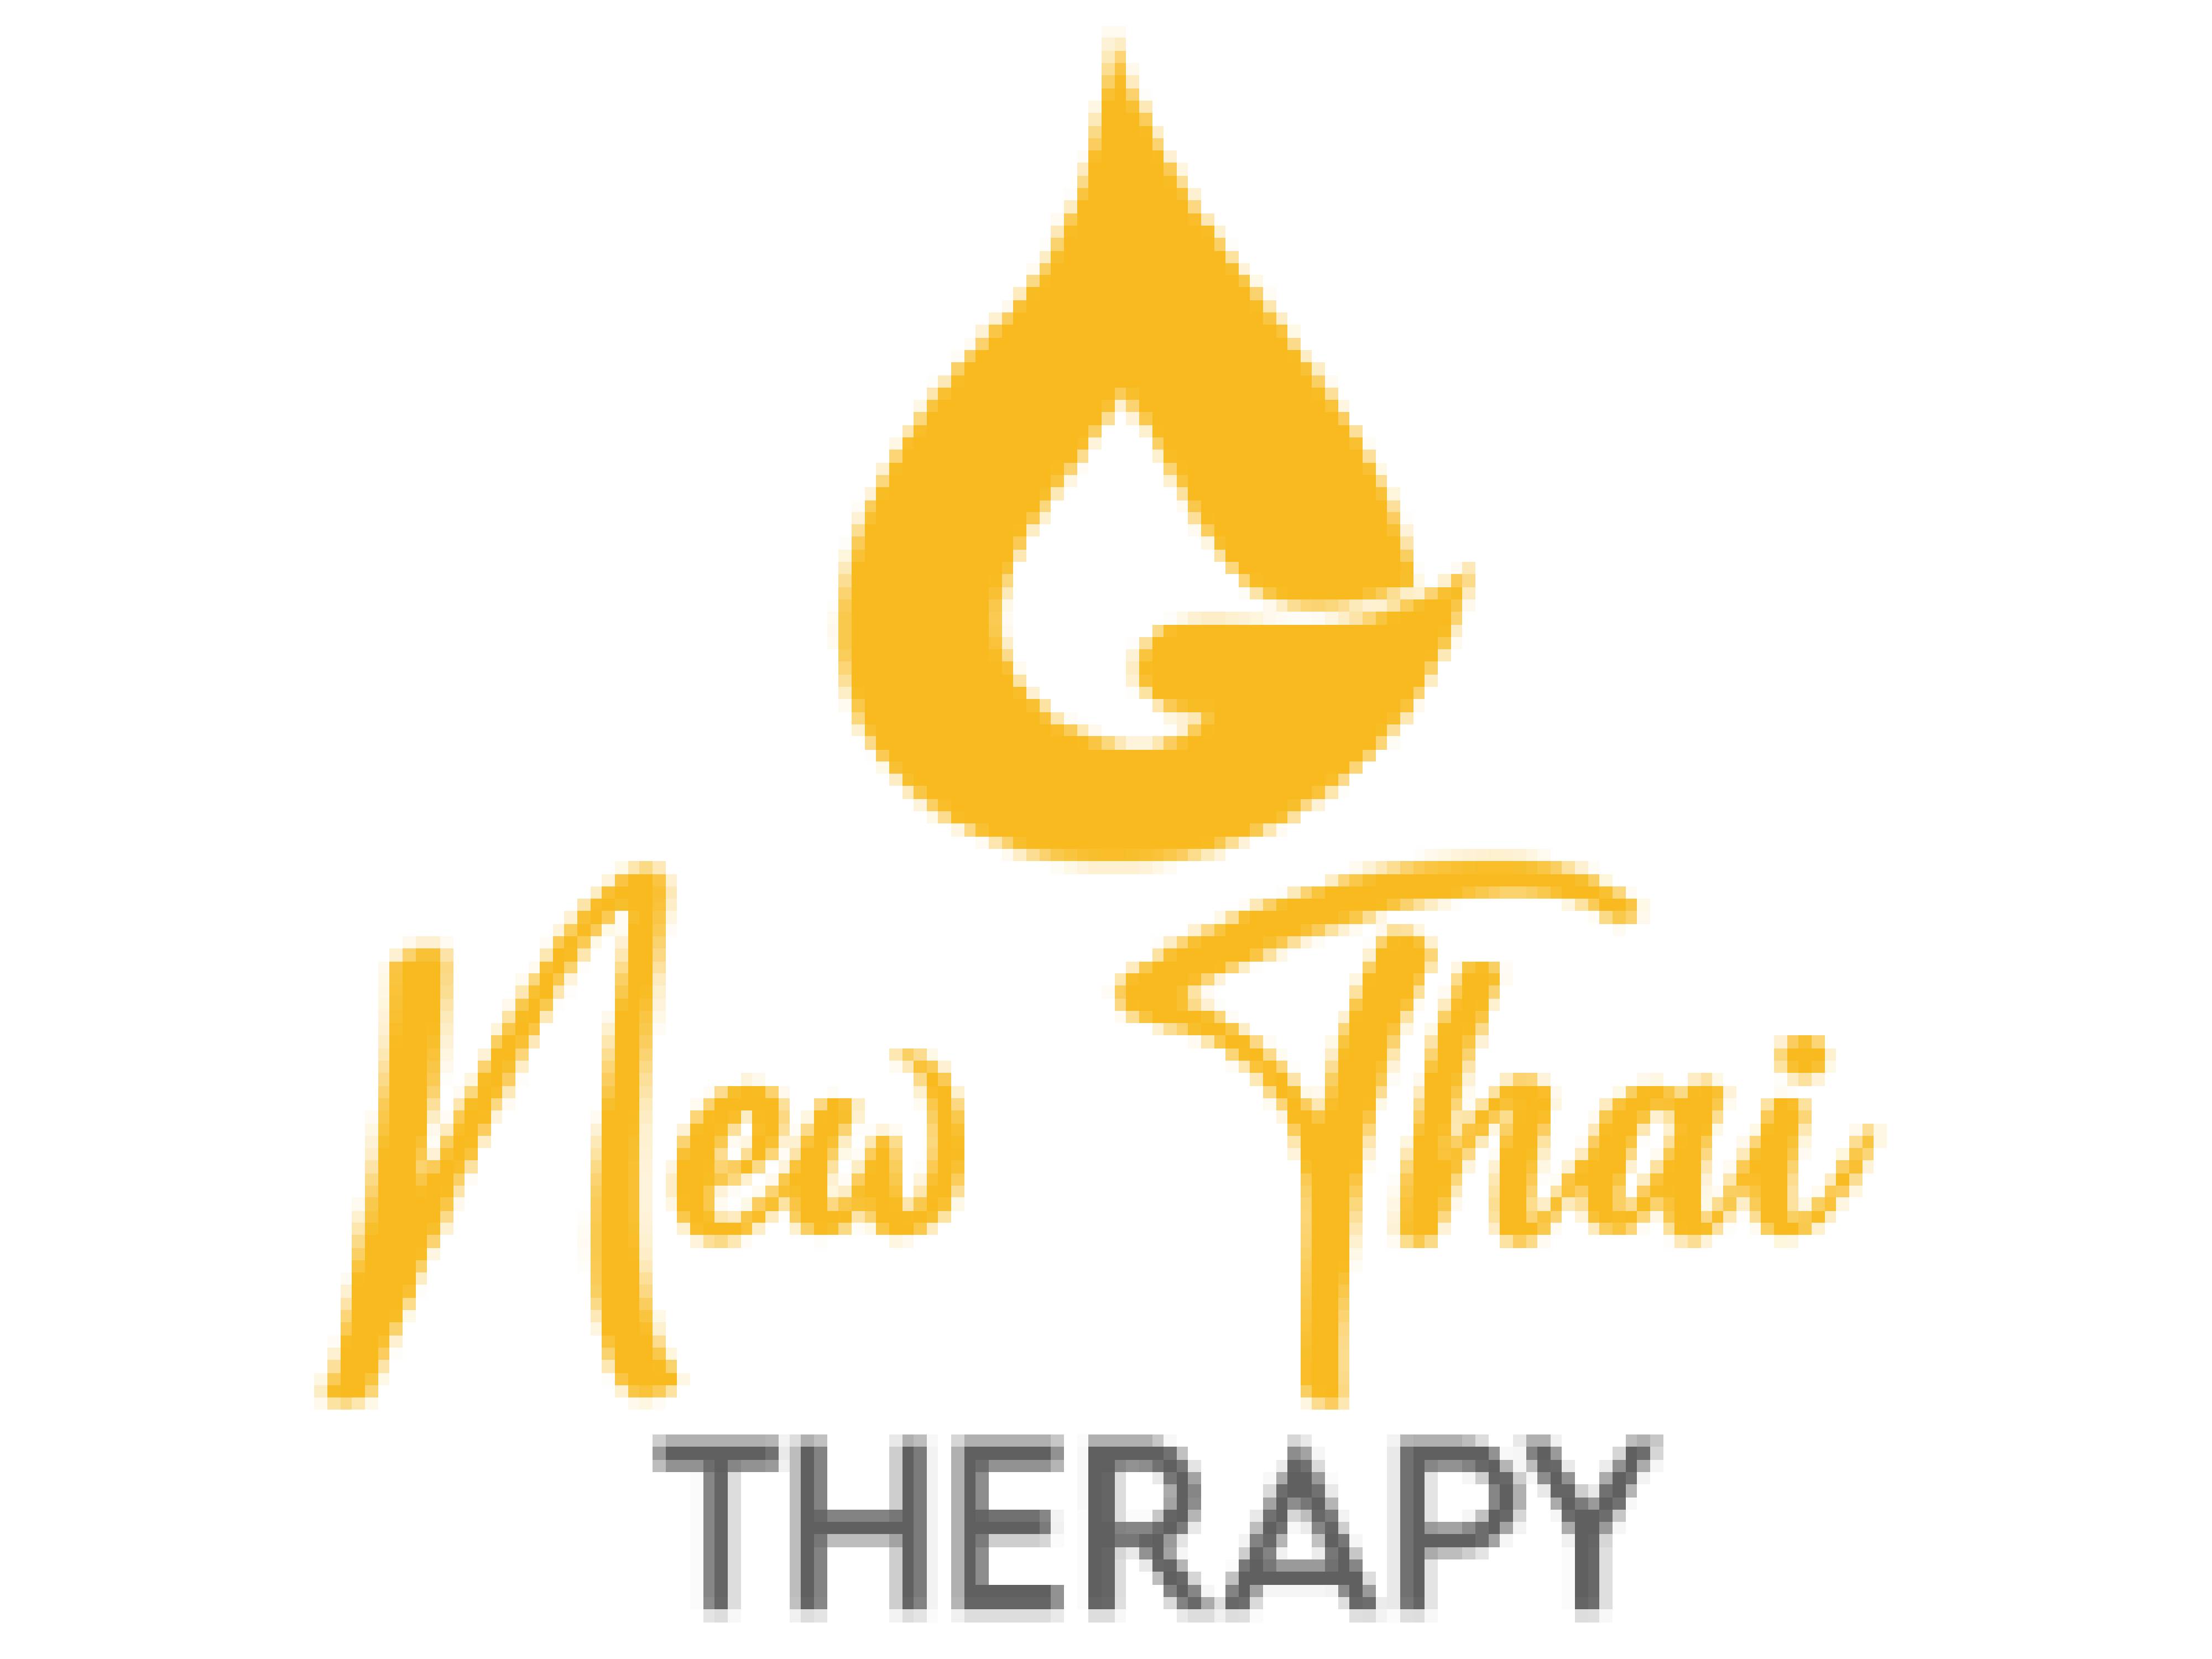 New Thai Therapy